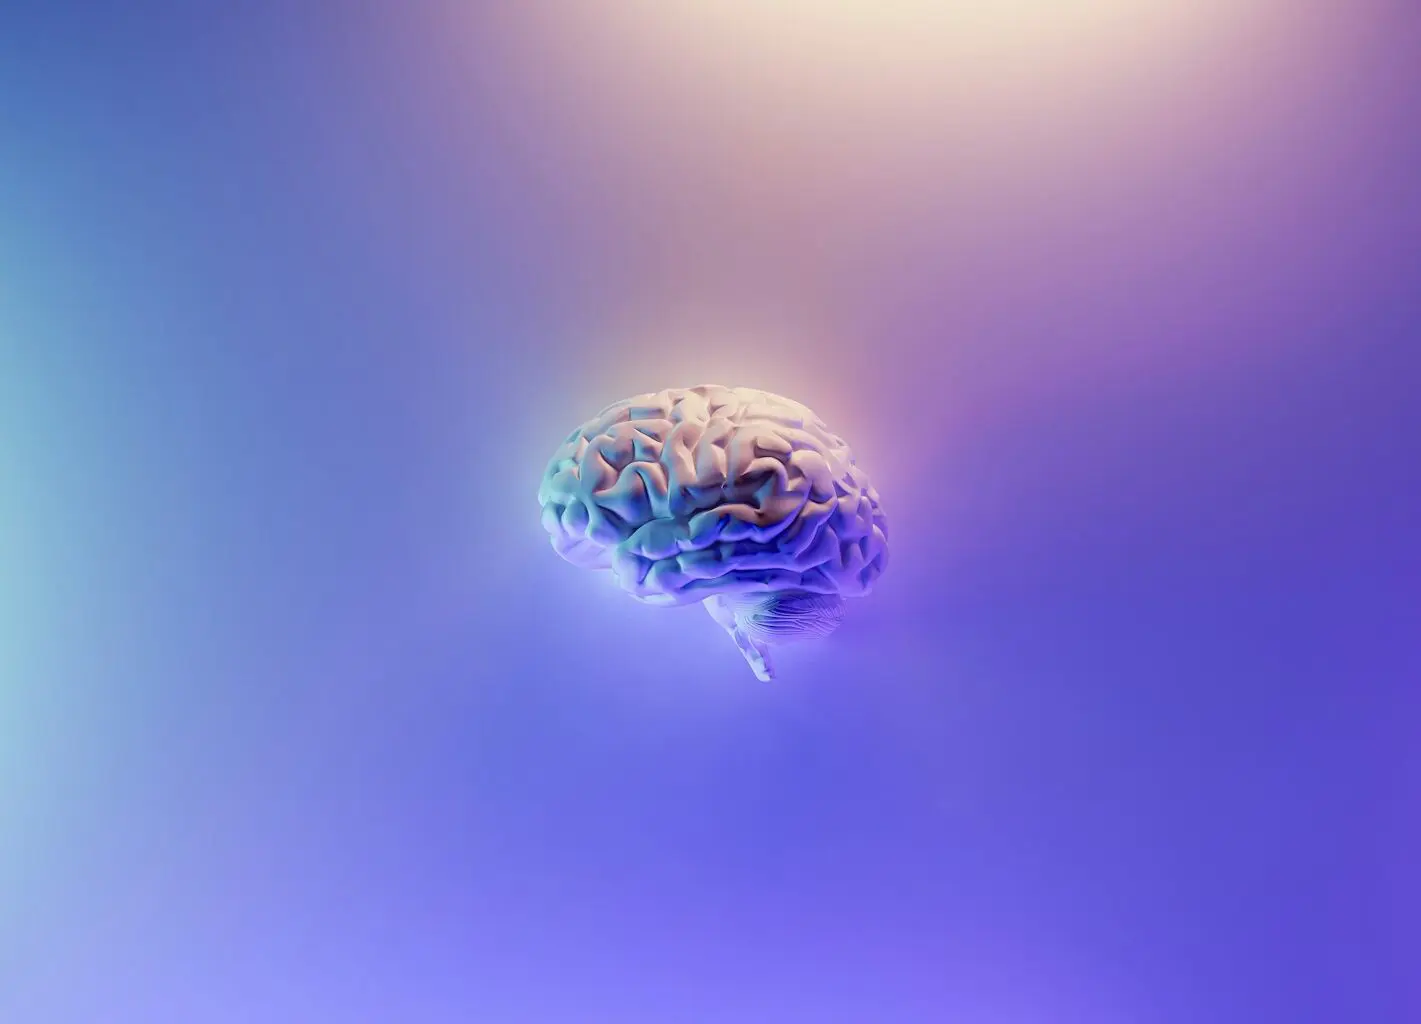 A human brain with a glowing effect against a purple and blue gradient background.